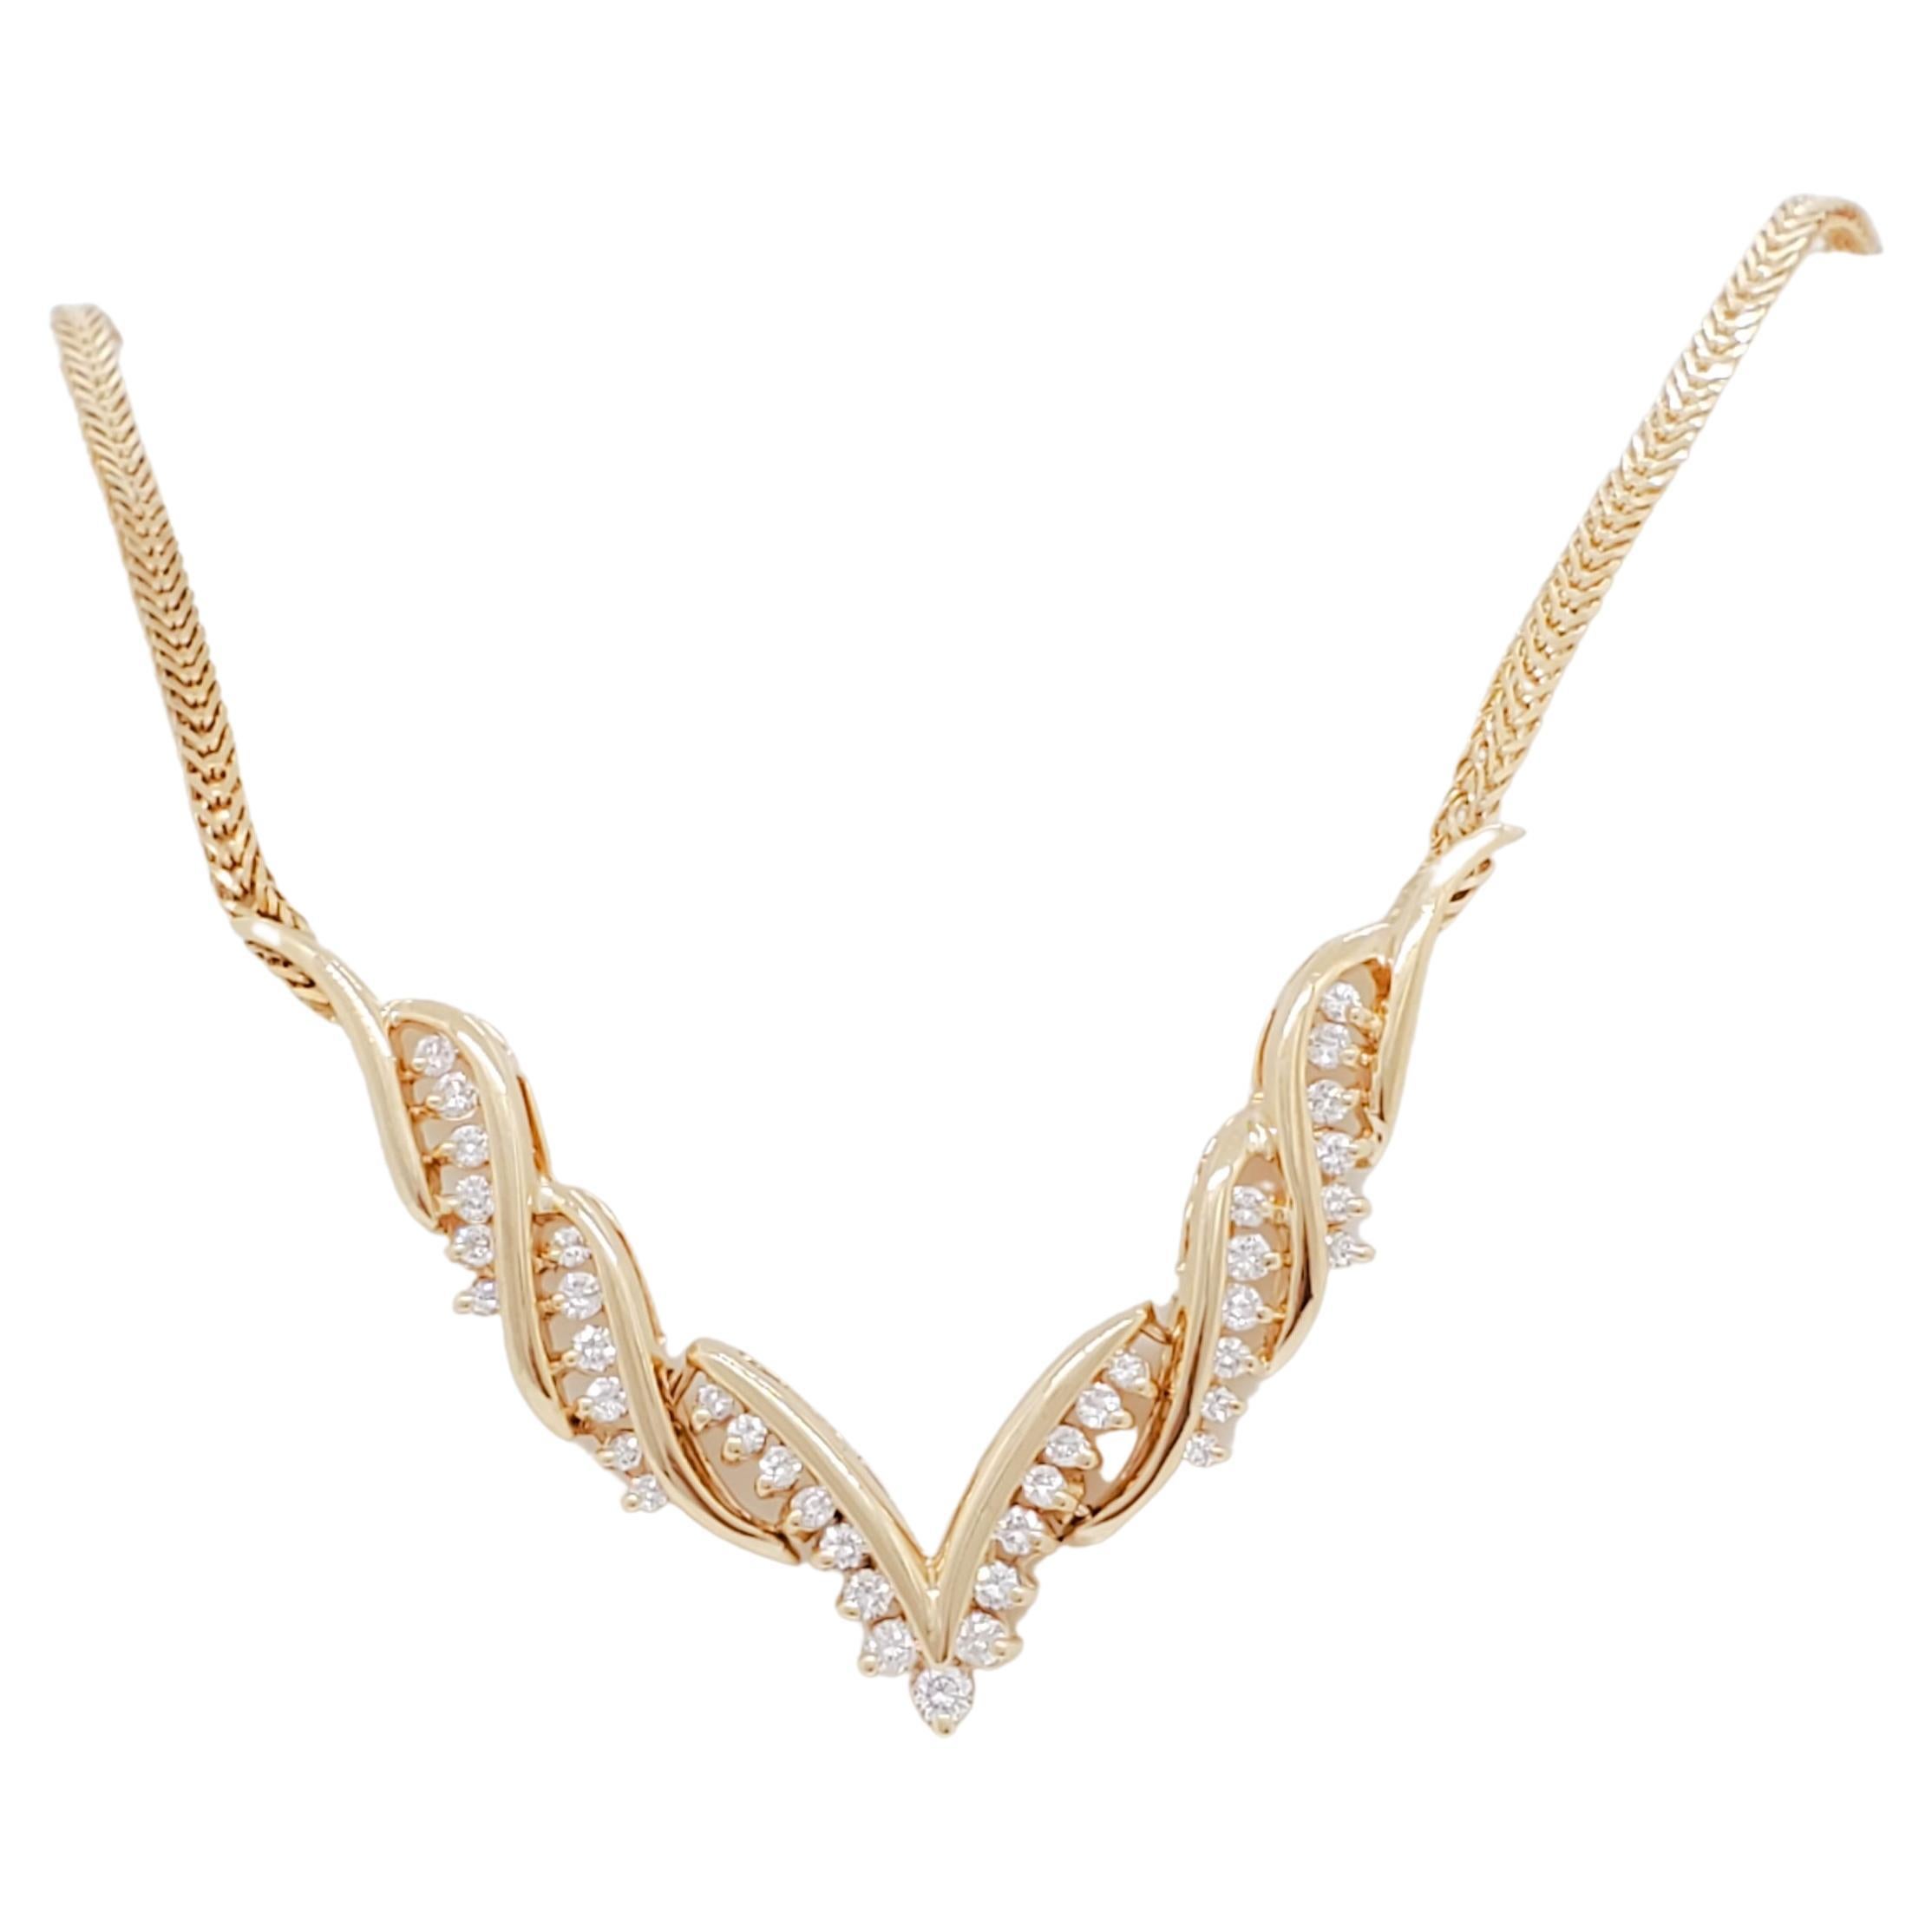 White Diamond Necklace in 14k Yellow Gold